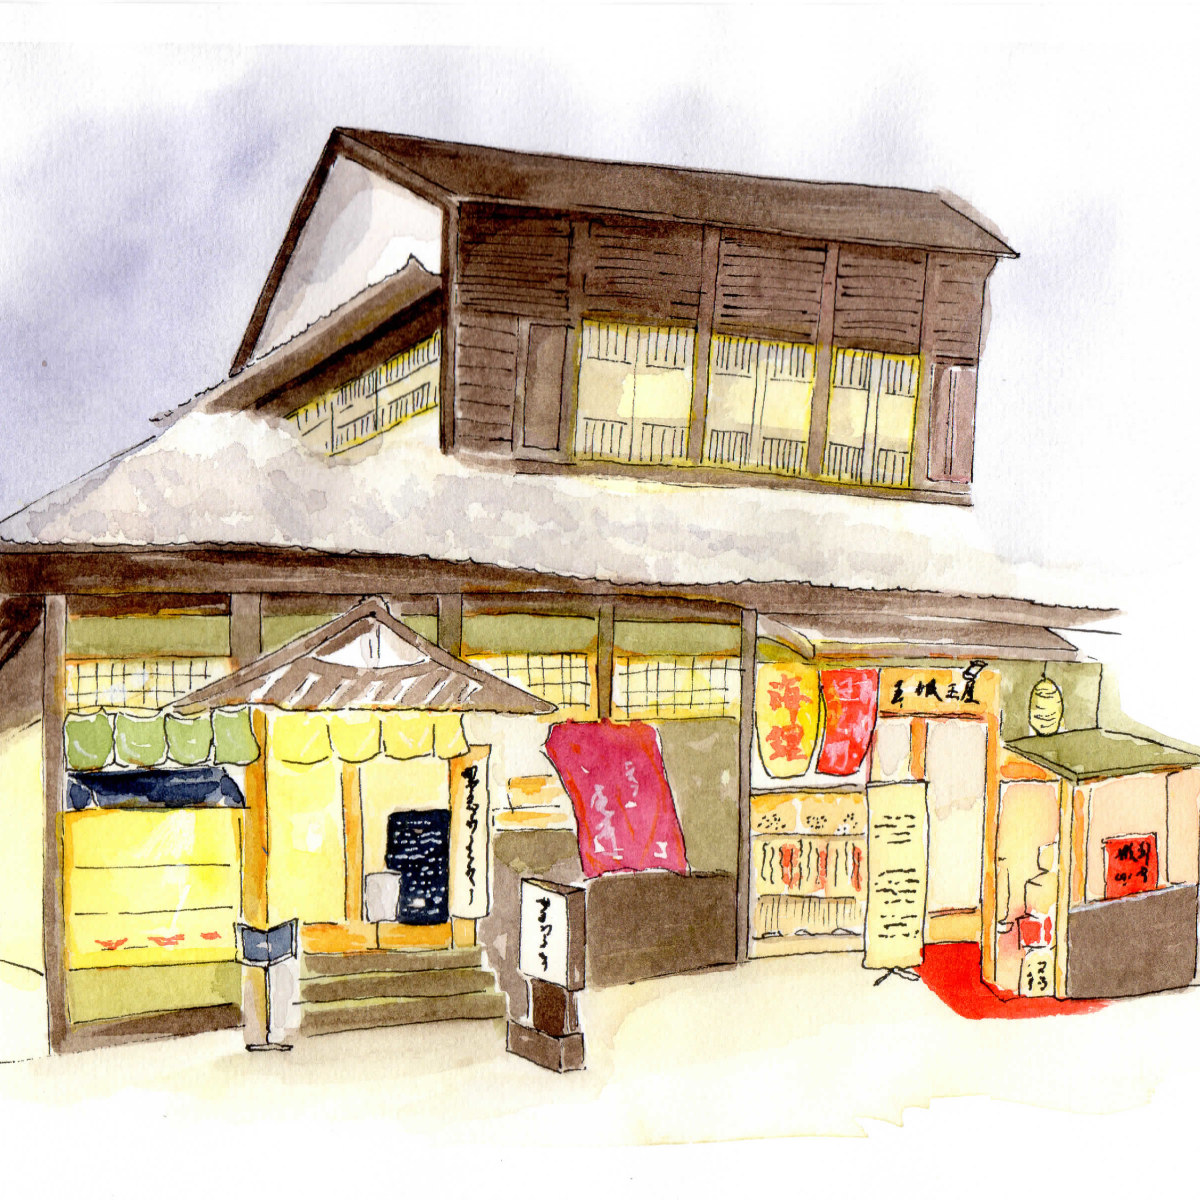 My project in Architectural Sketching with Watercolor and Ink course ...